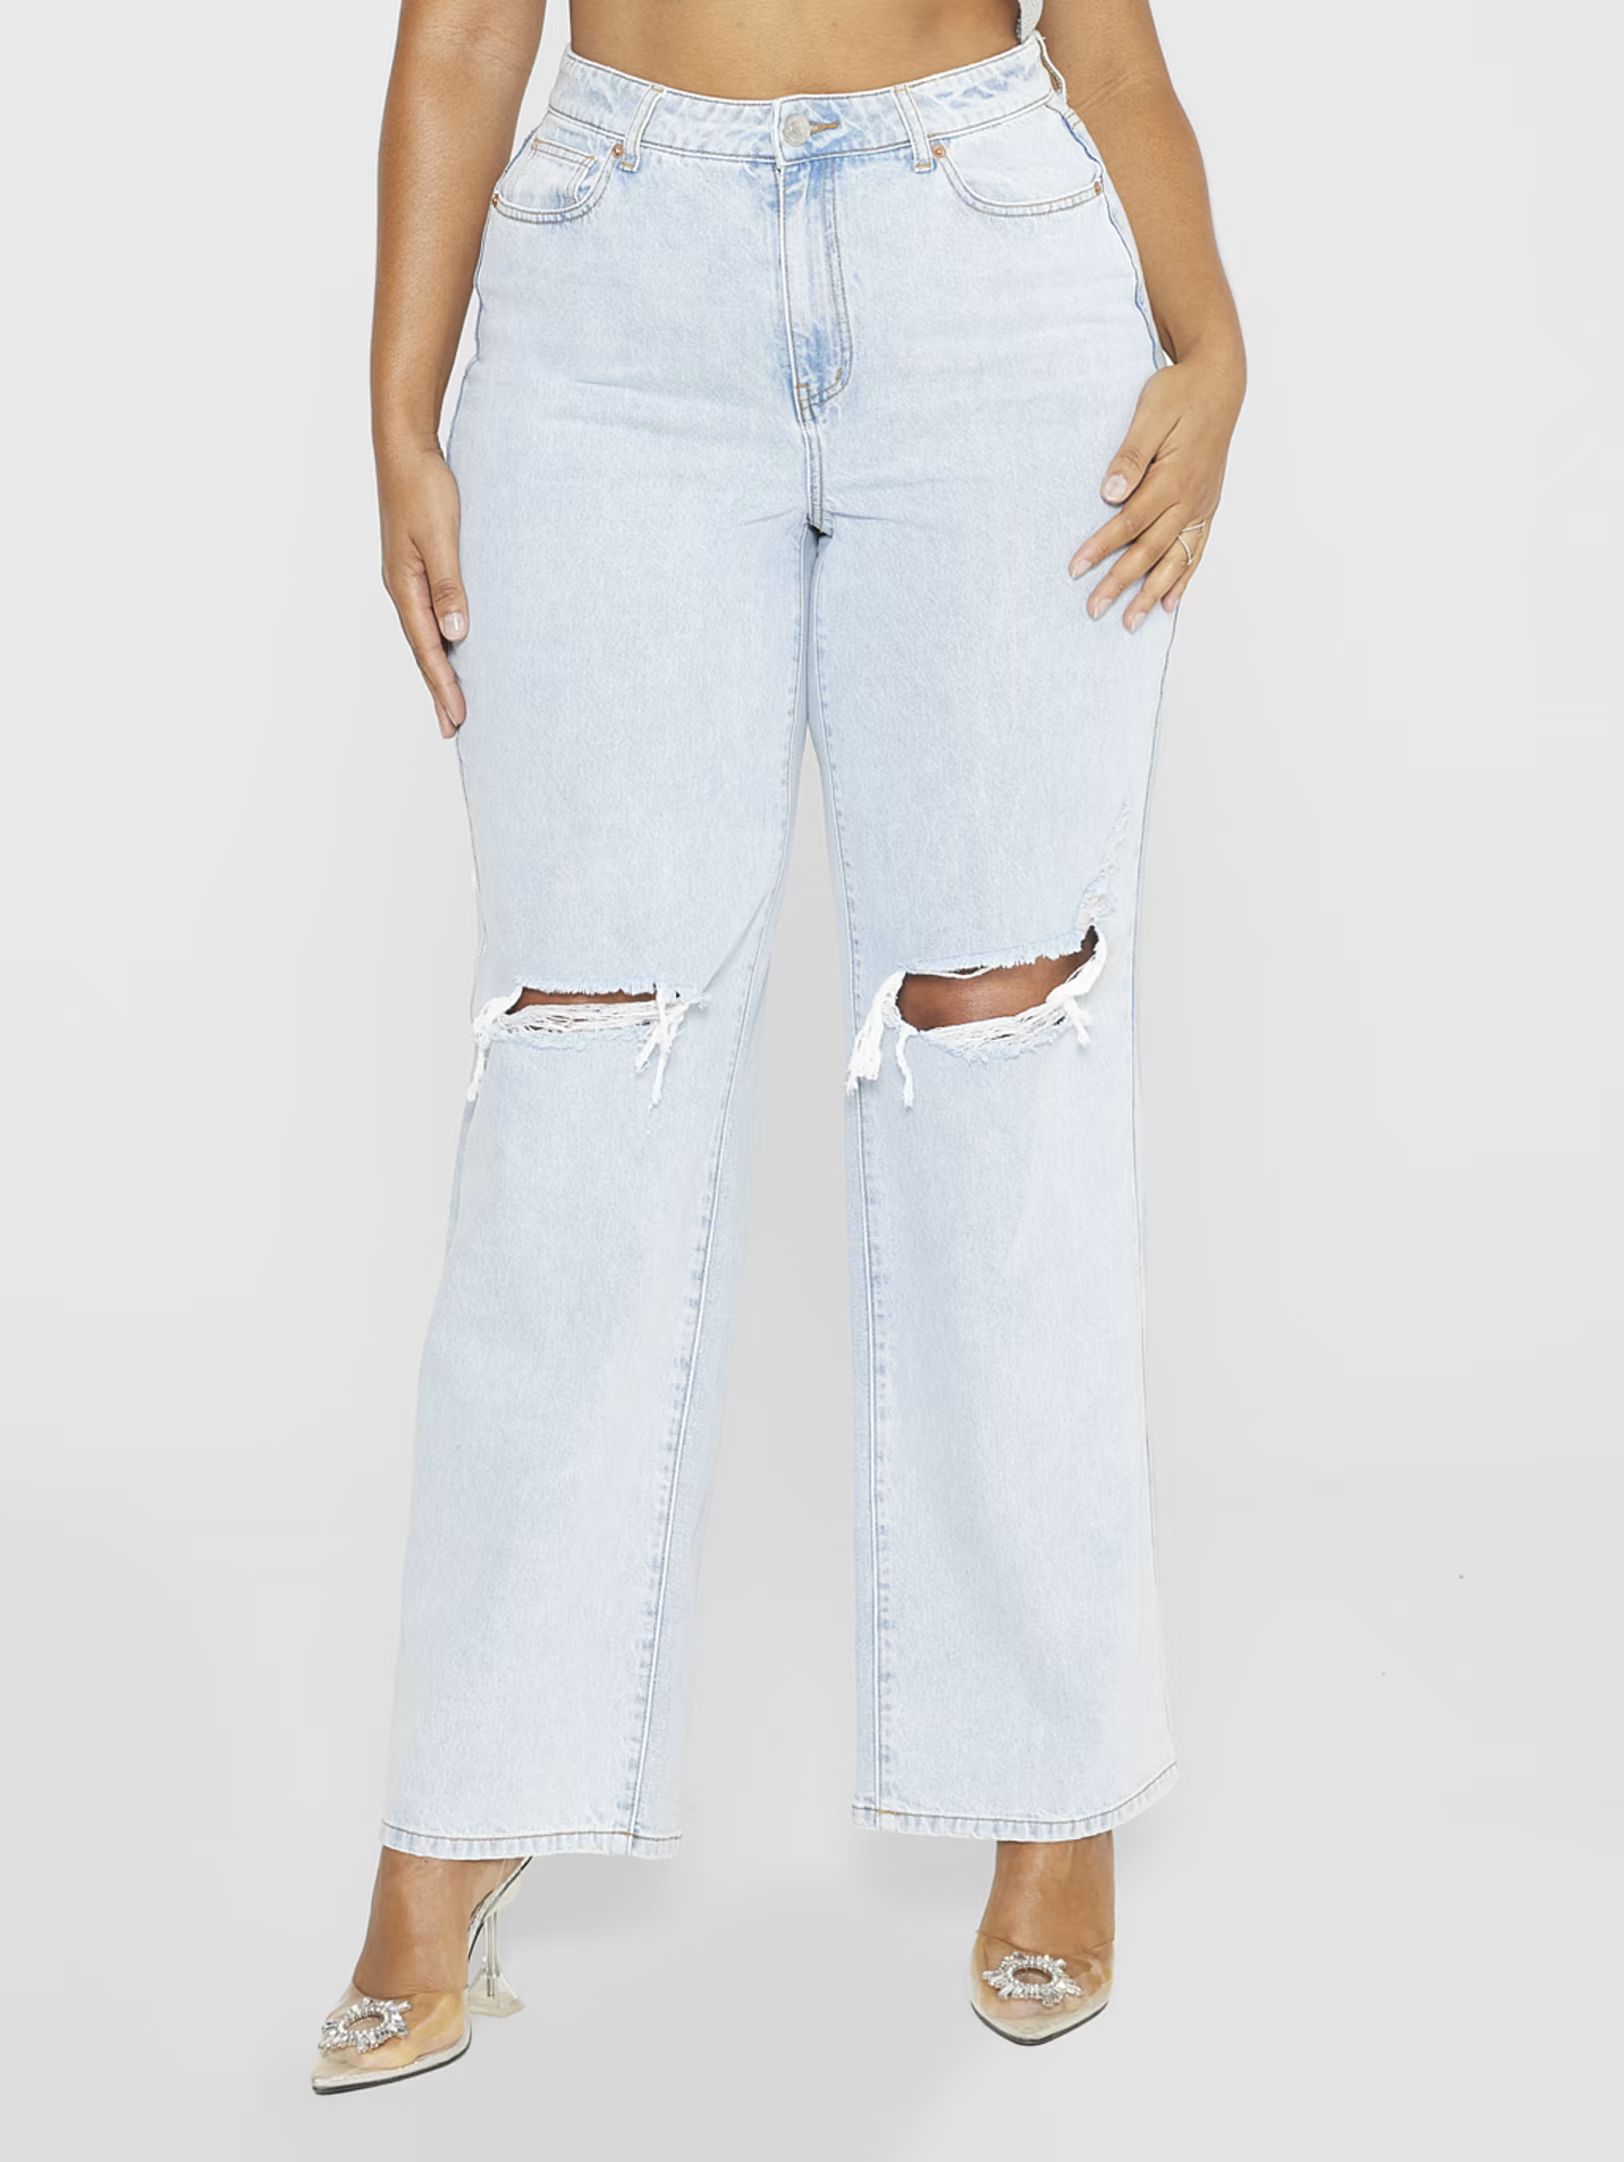 Plus Size Chloe High Rise Destructed Relaxed Fit Jeans - Gabi Fresh x FTF | Fashion to Figure | Fashion To Figure